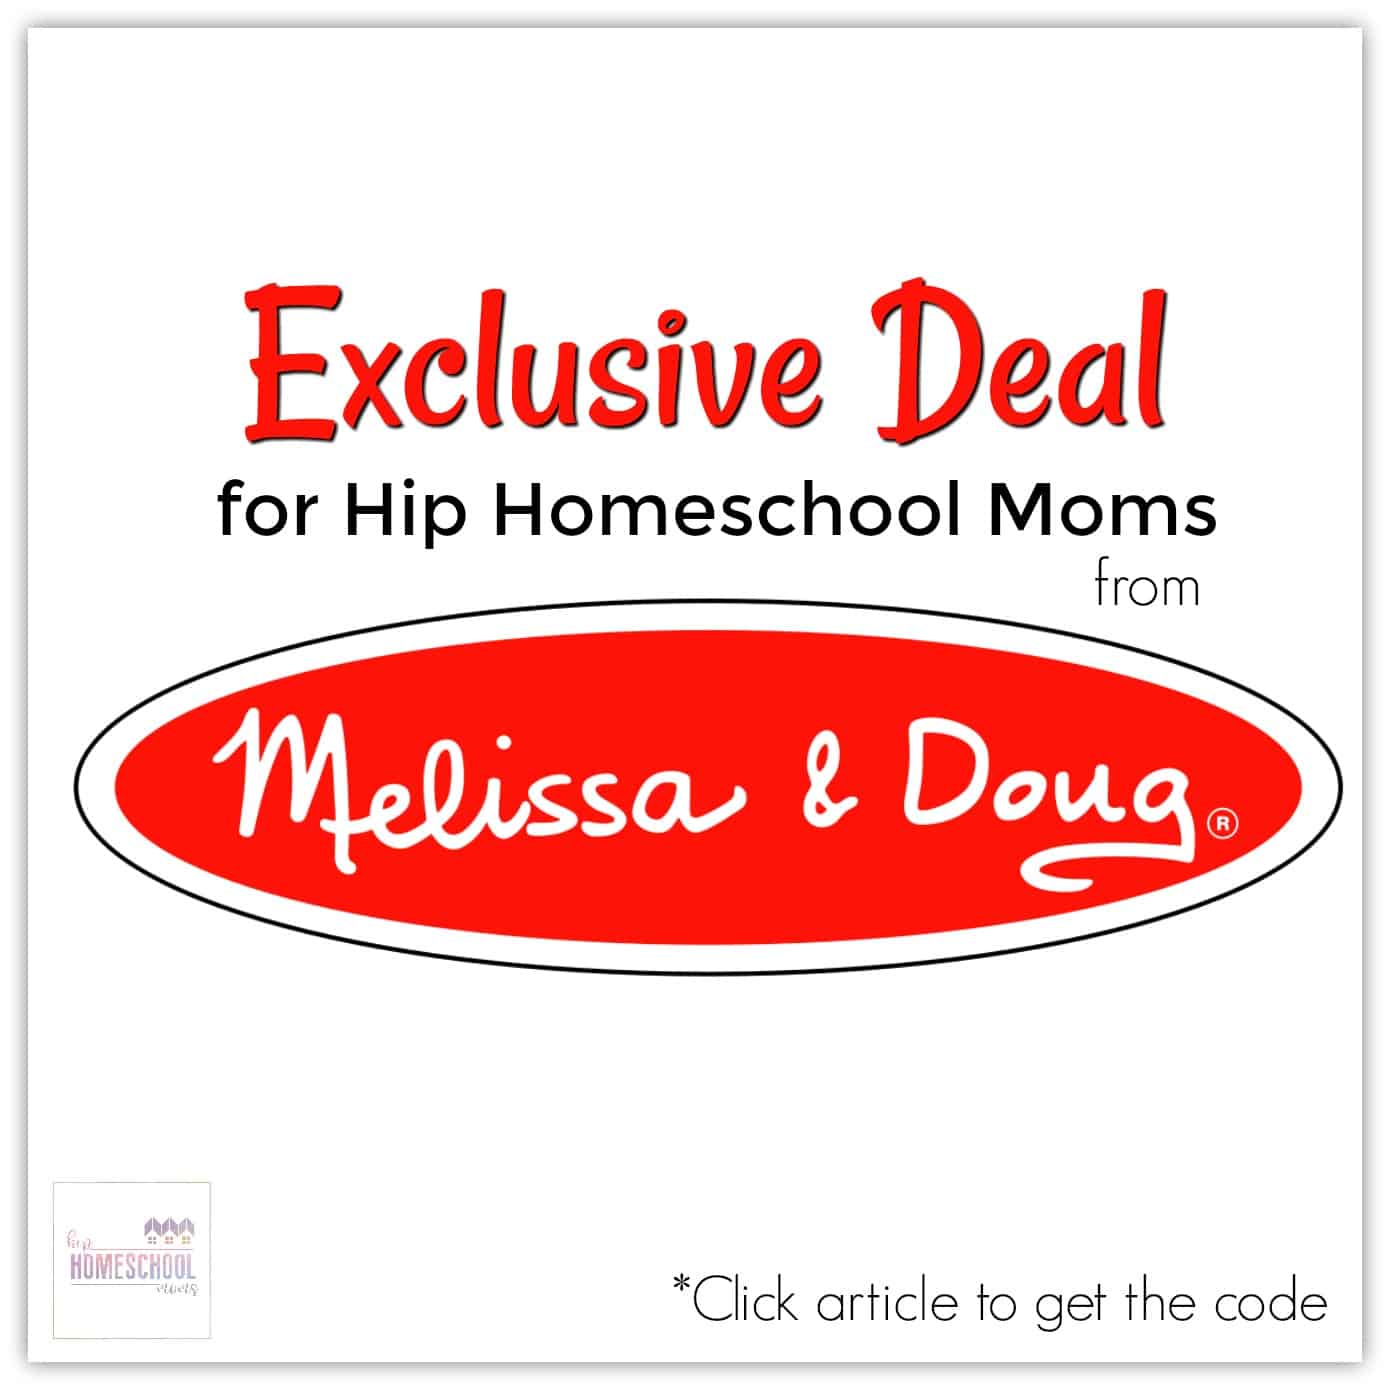 EXCLUSIVE 25% off Melissa & Doug for Hip Moms!